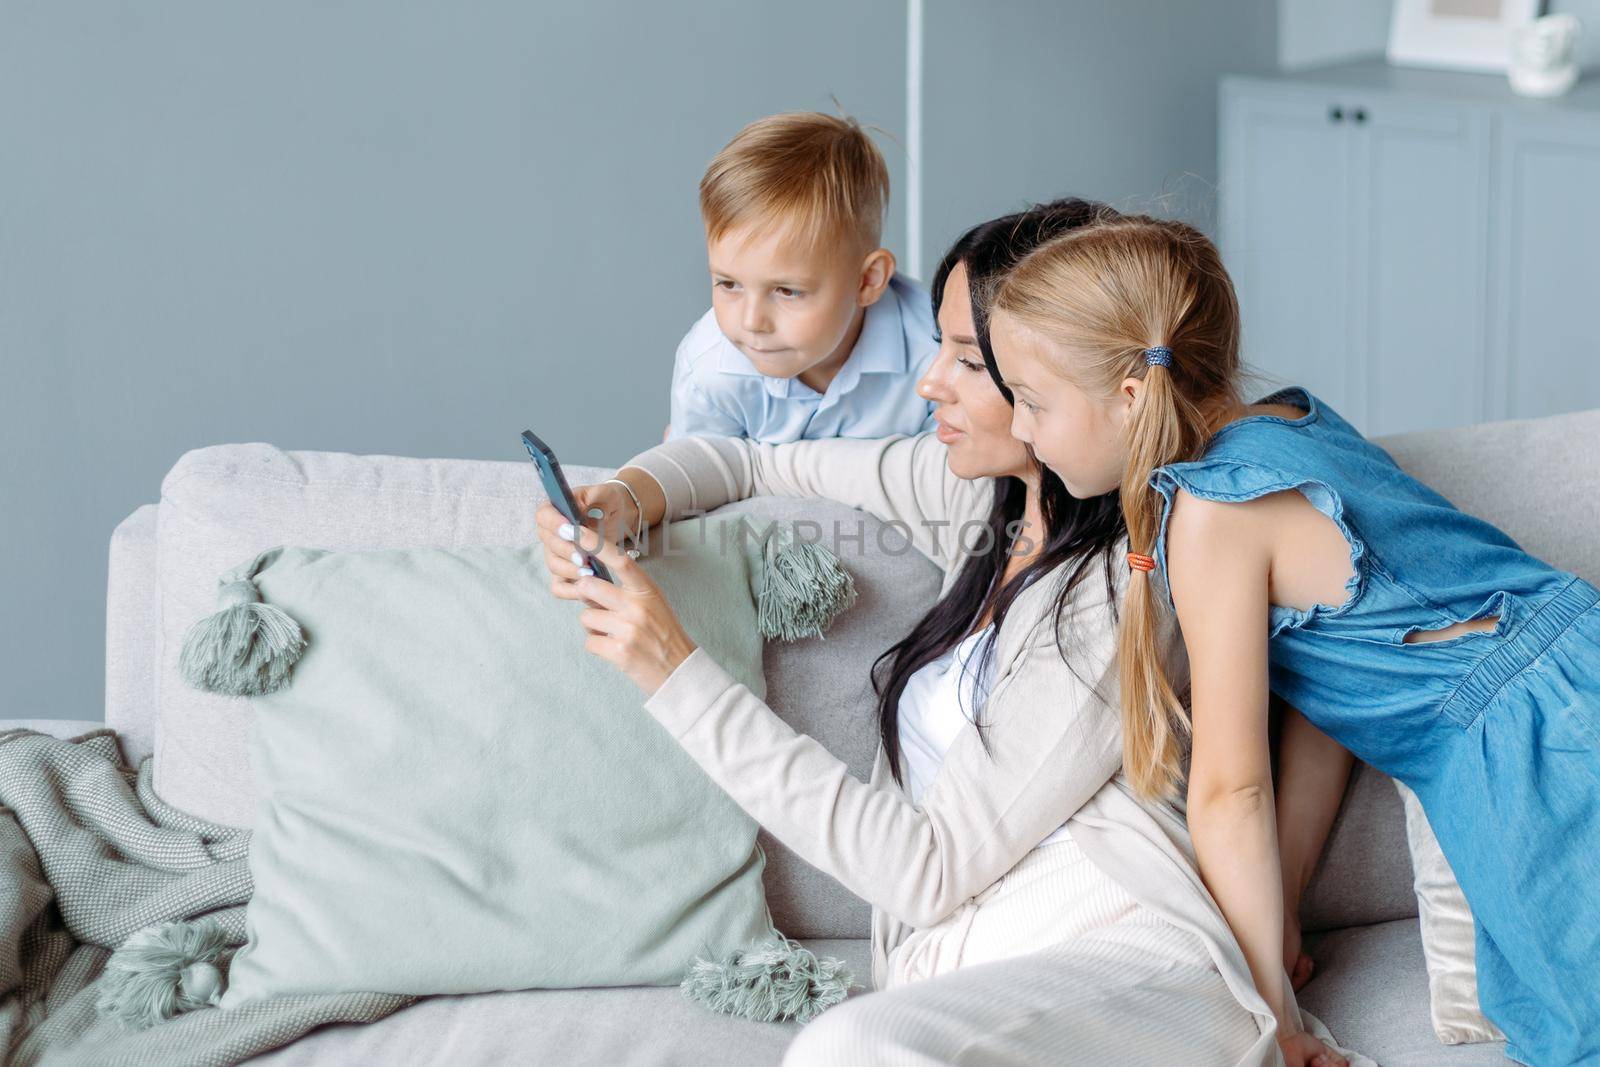 mom with two kids watching videos on her smartphone. photo with a copy -space.